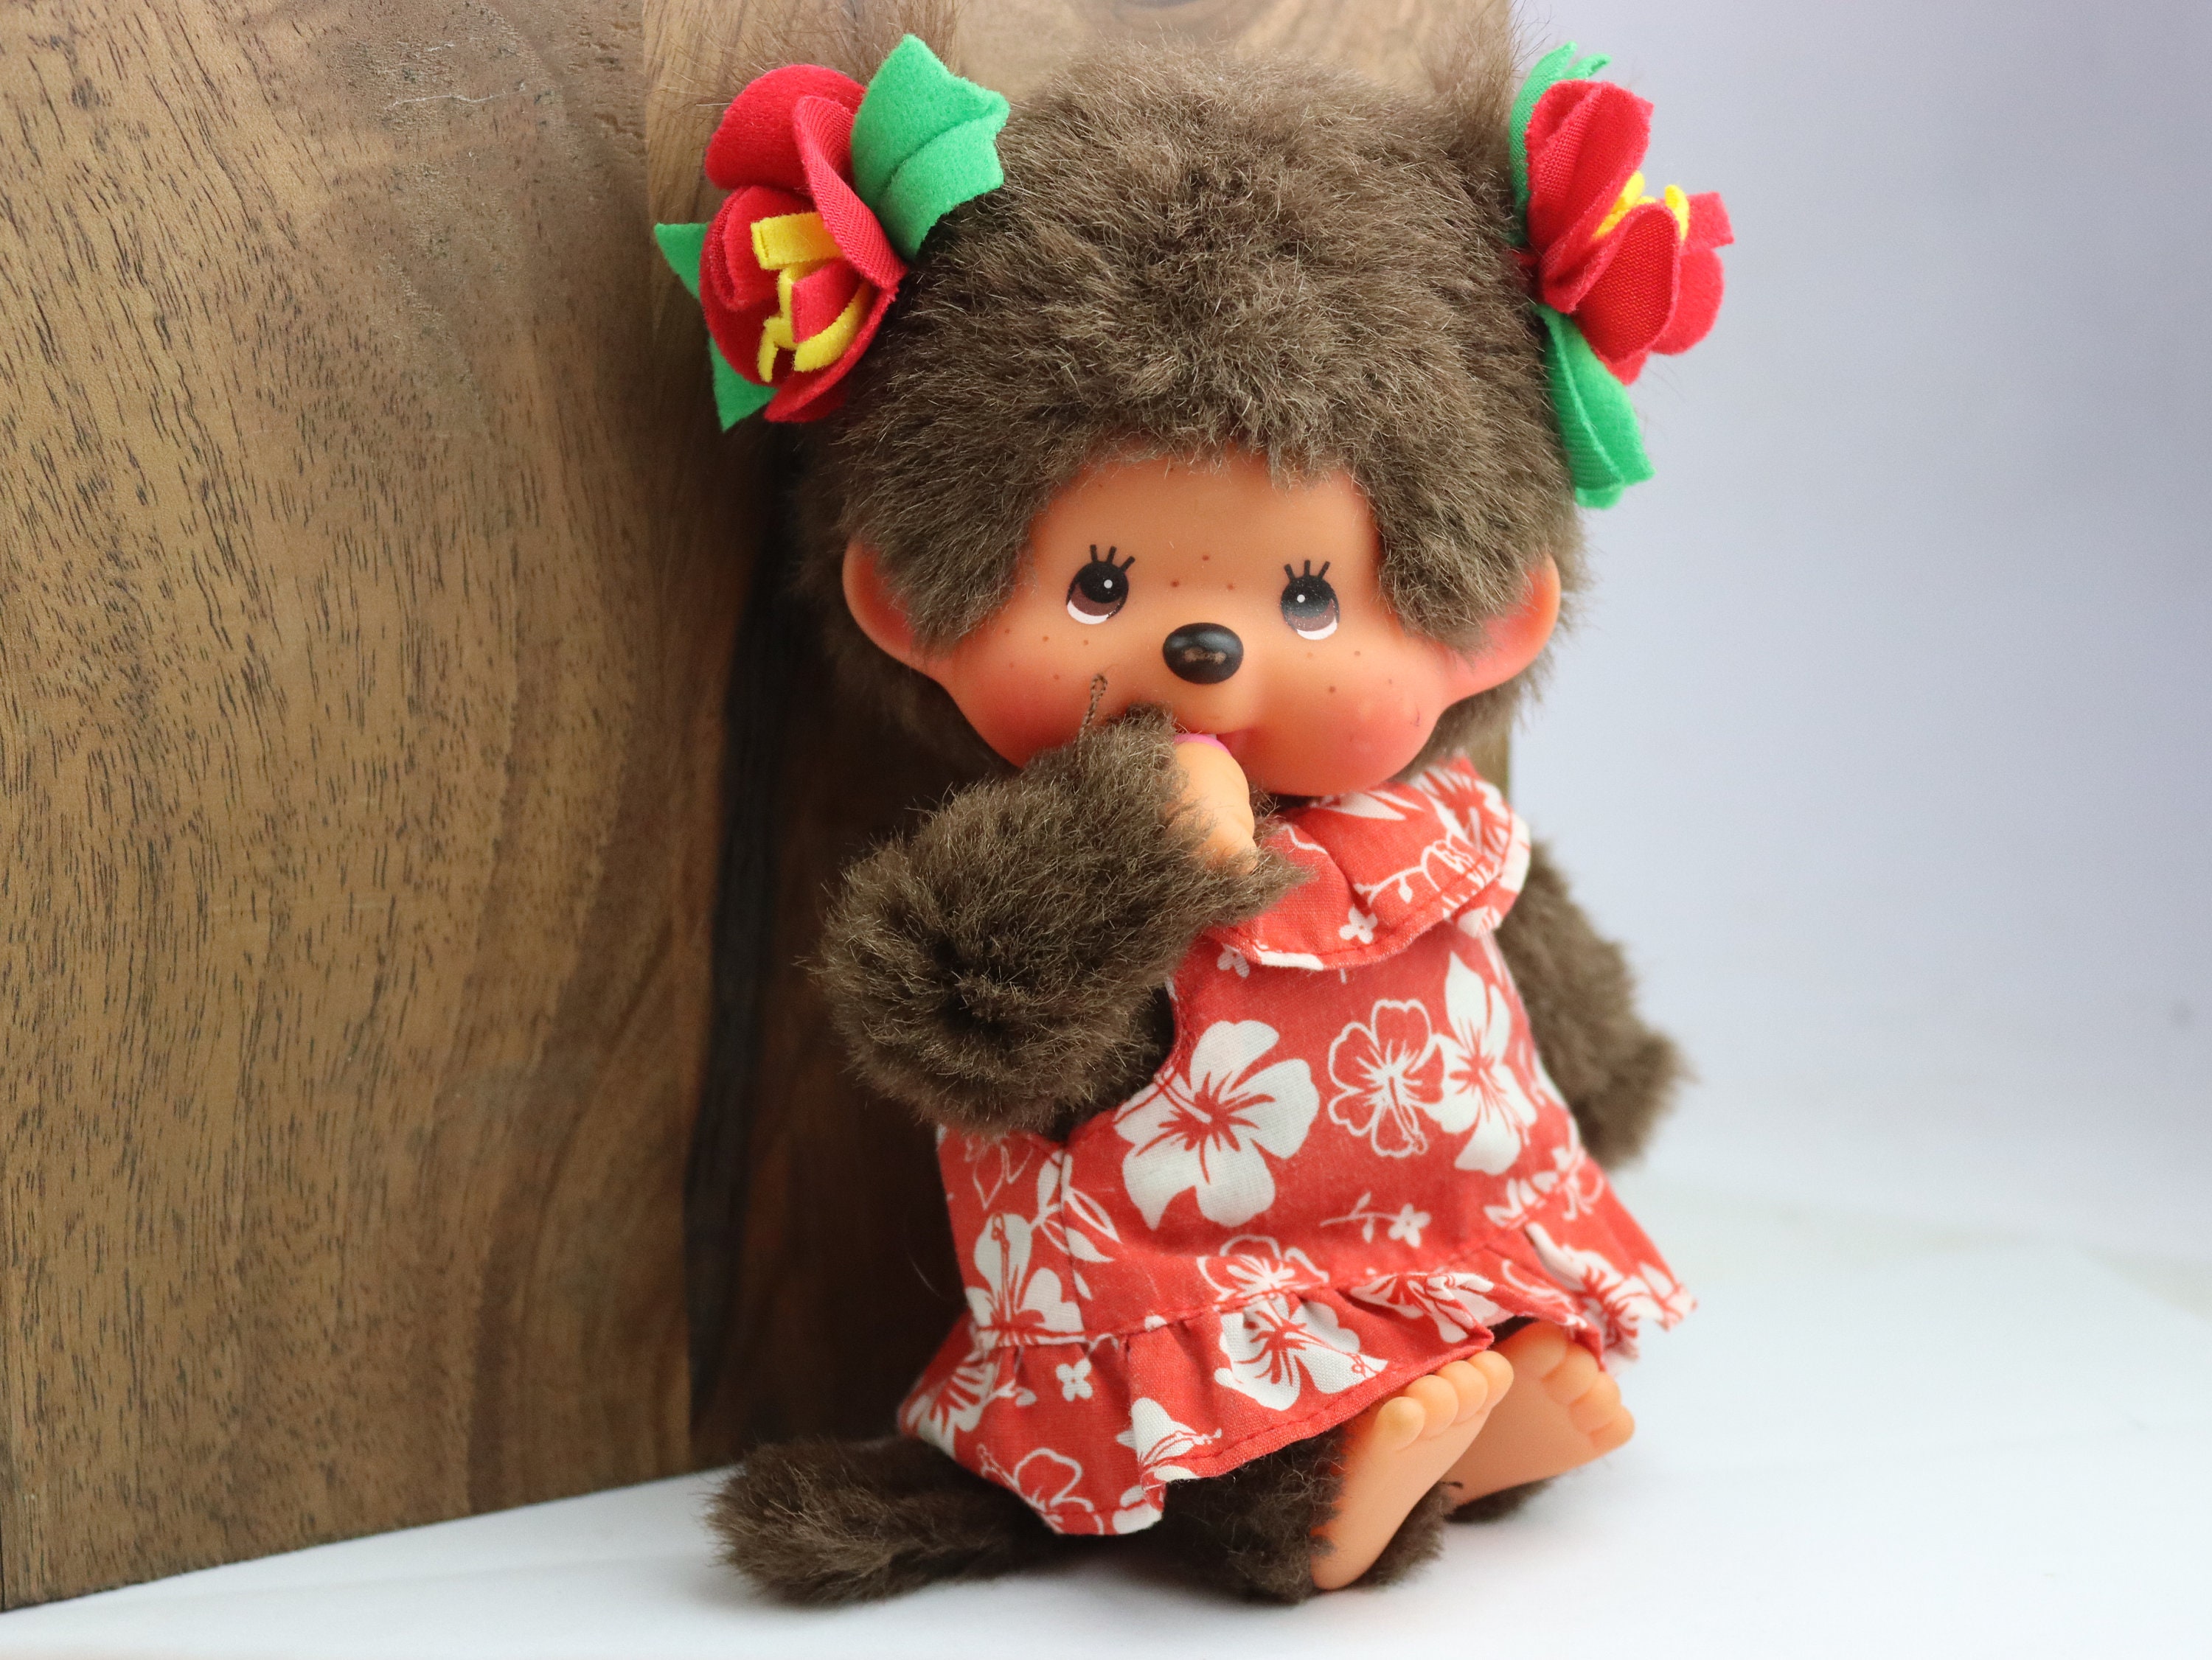 Cute and Safe monchhichi toy, Perfect for Gifting 